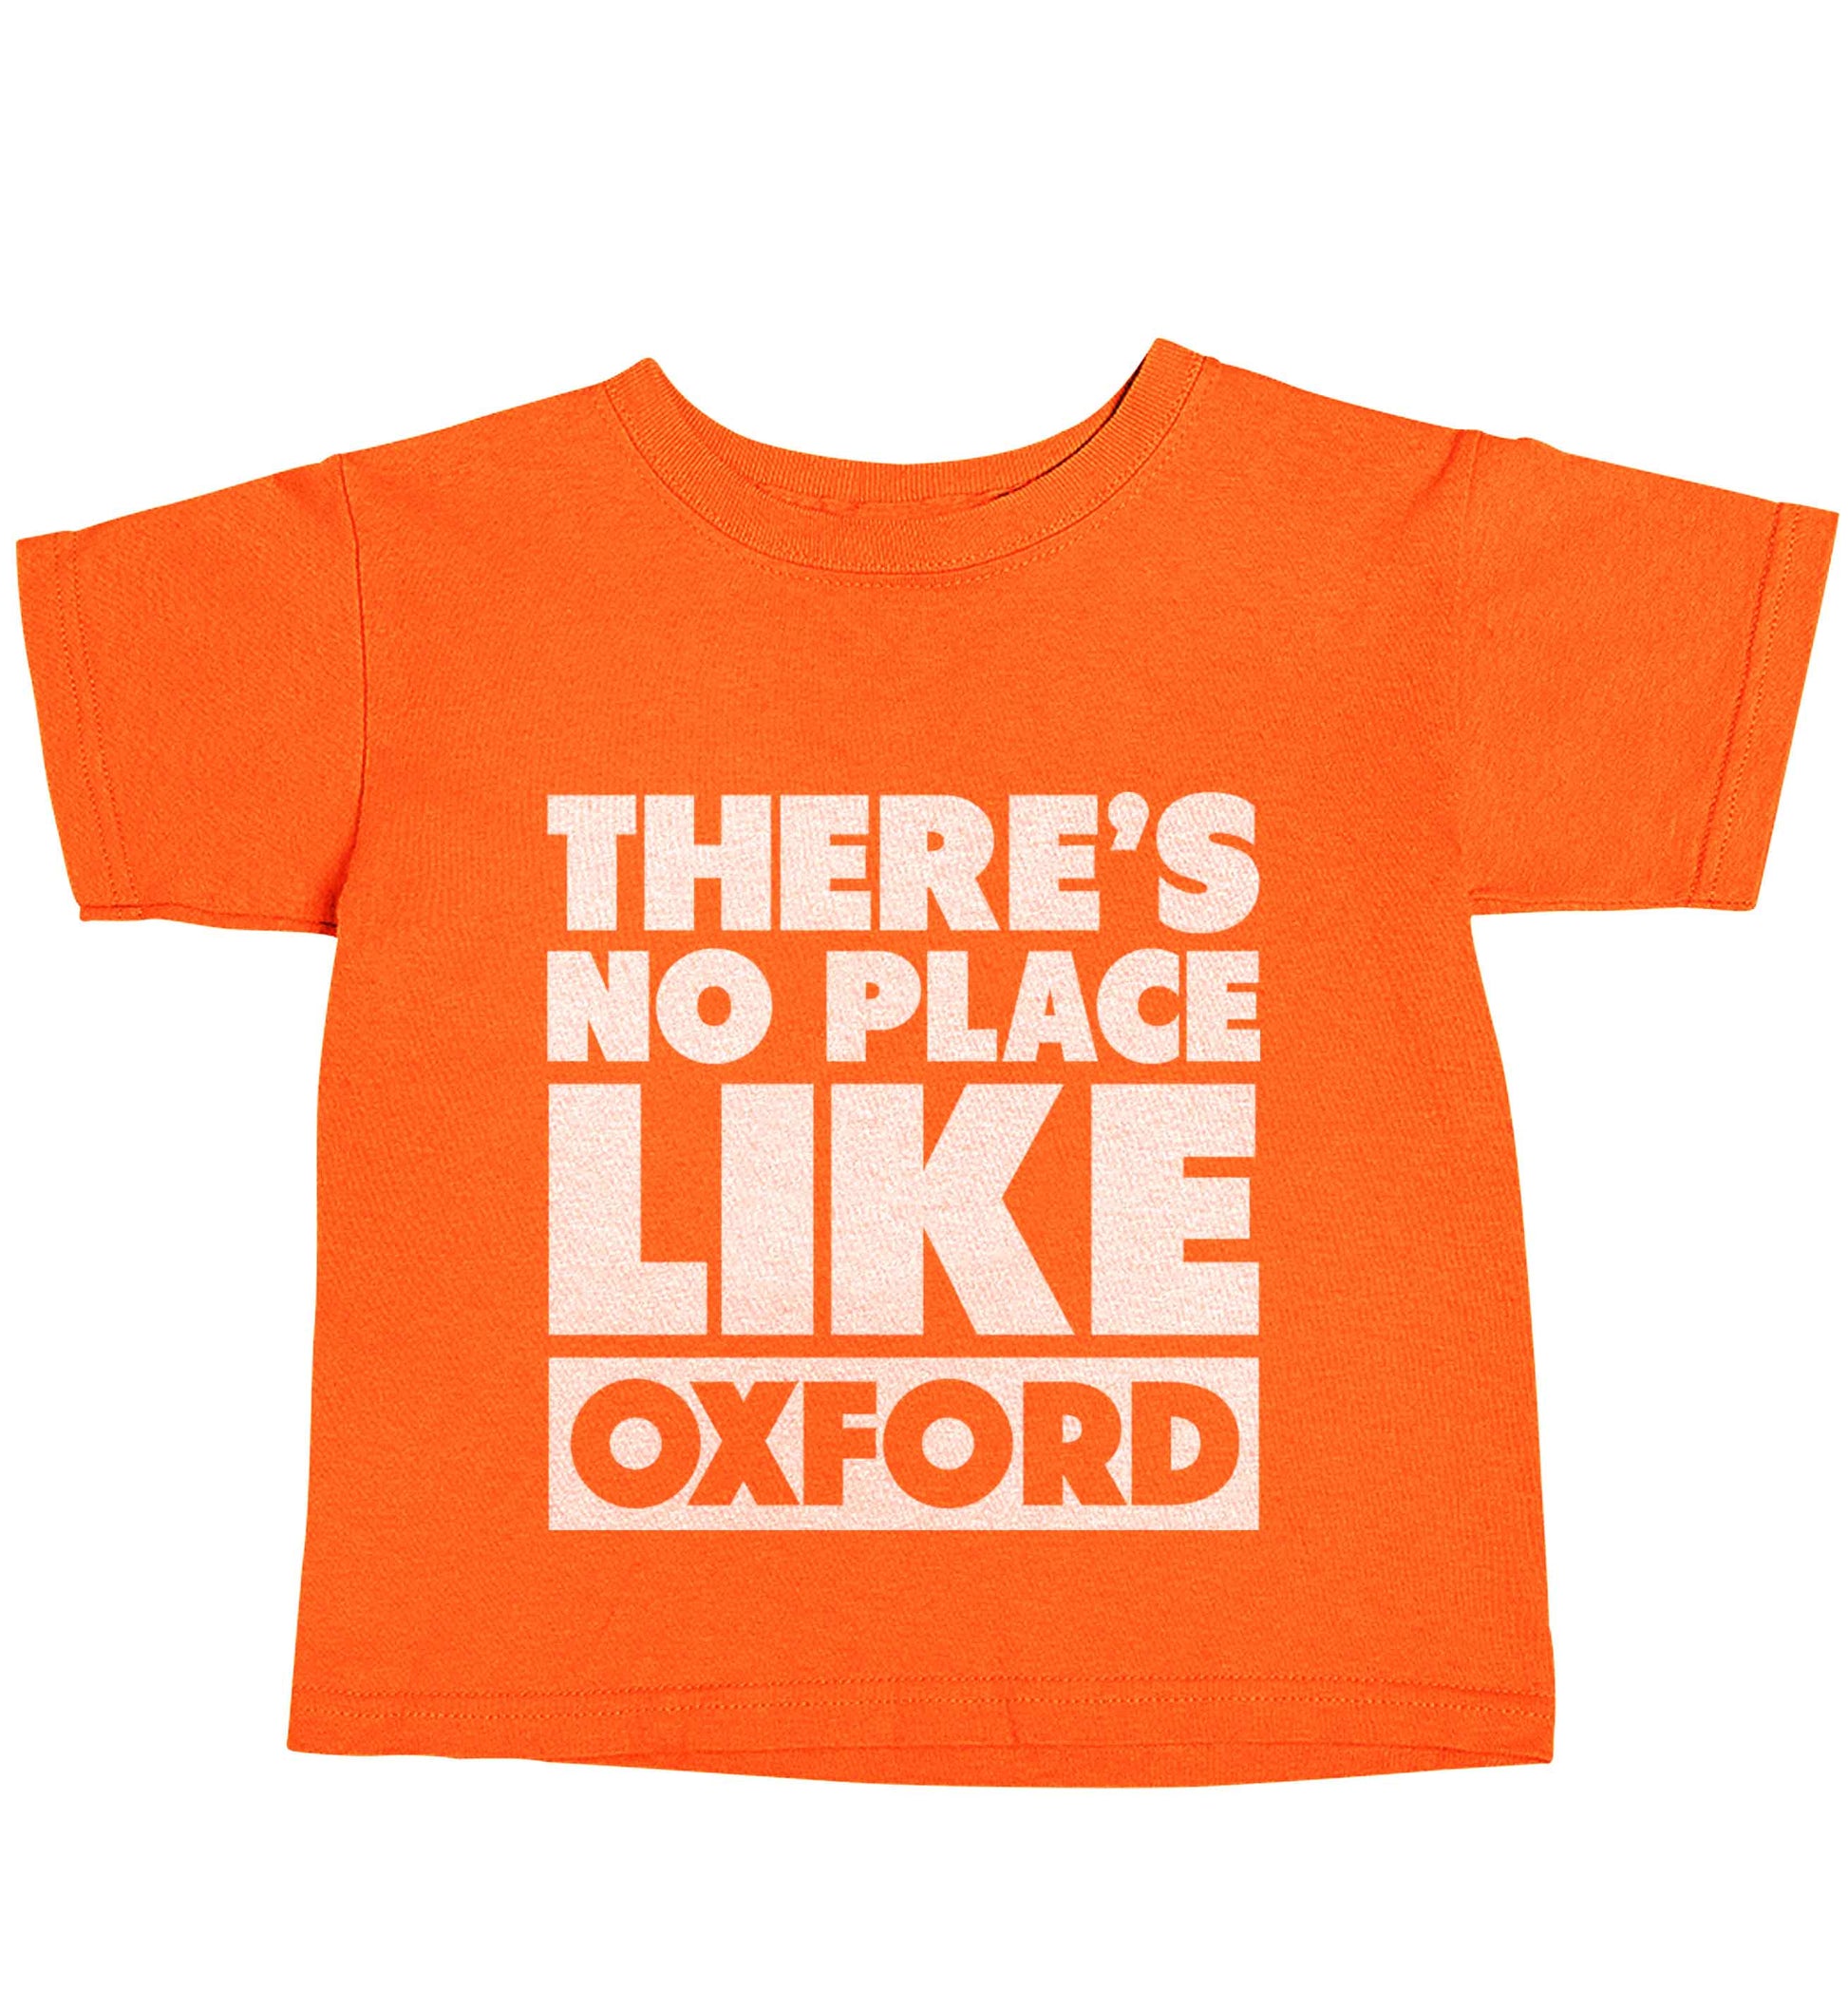 There's no place like Oxford orange baby toddler Tshirt 2 Years